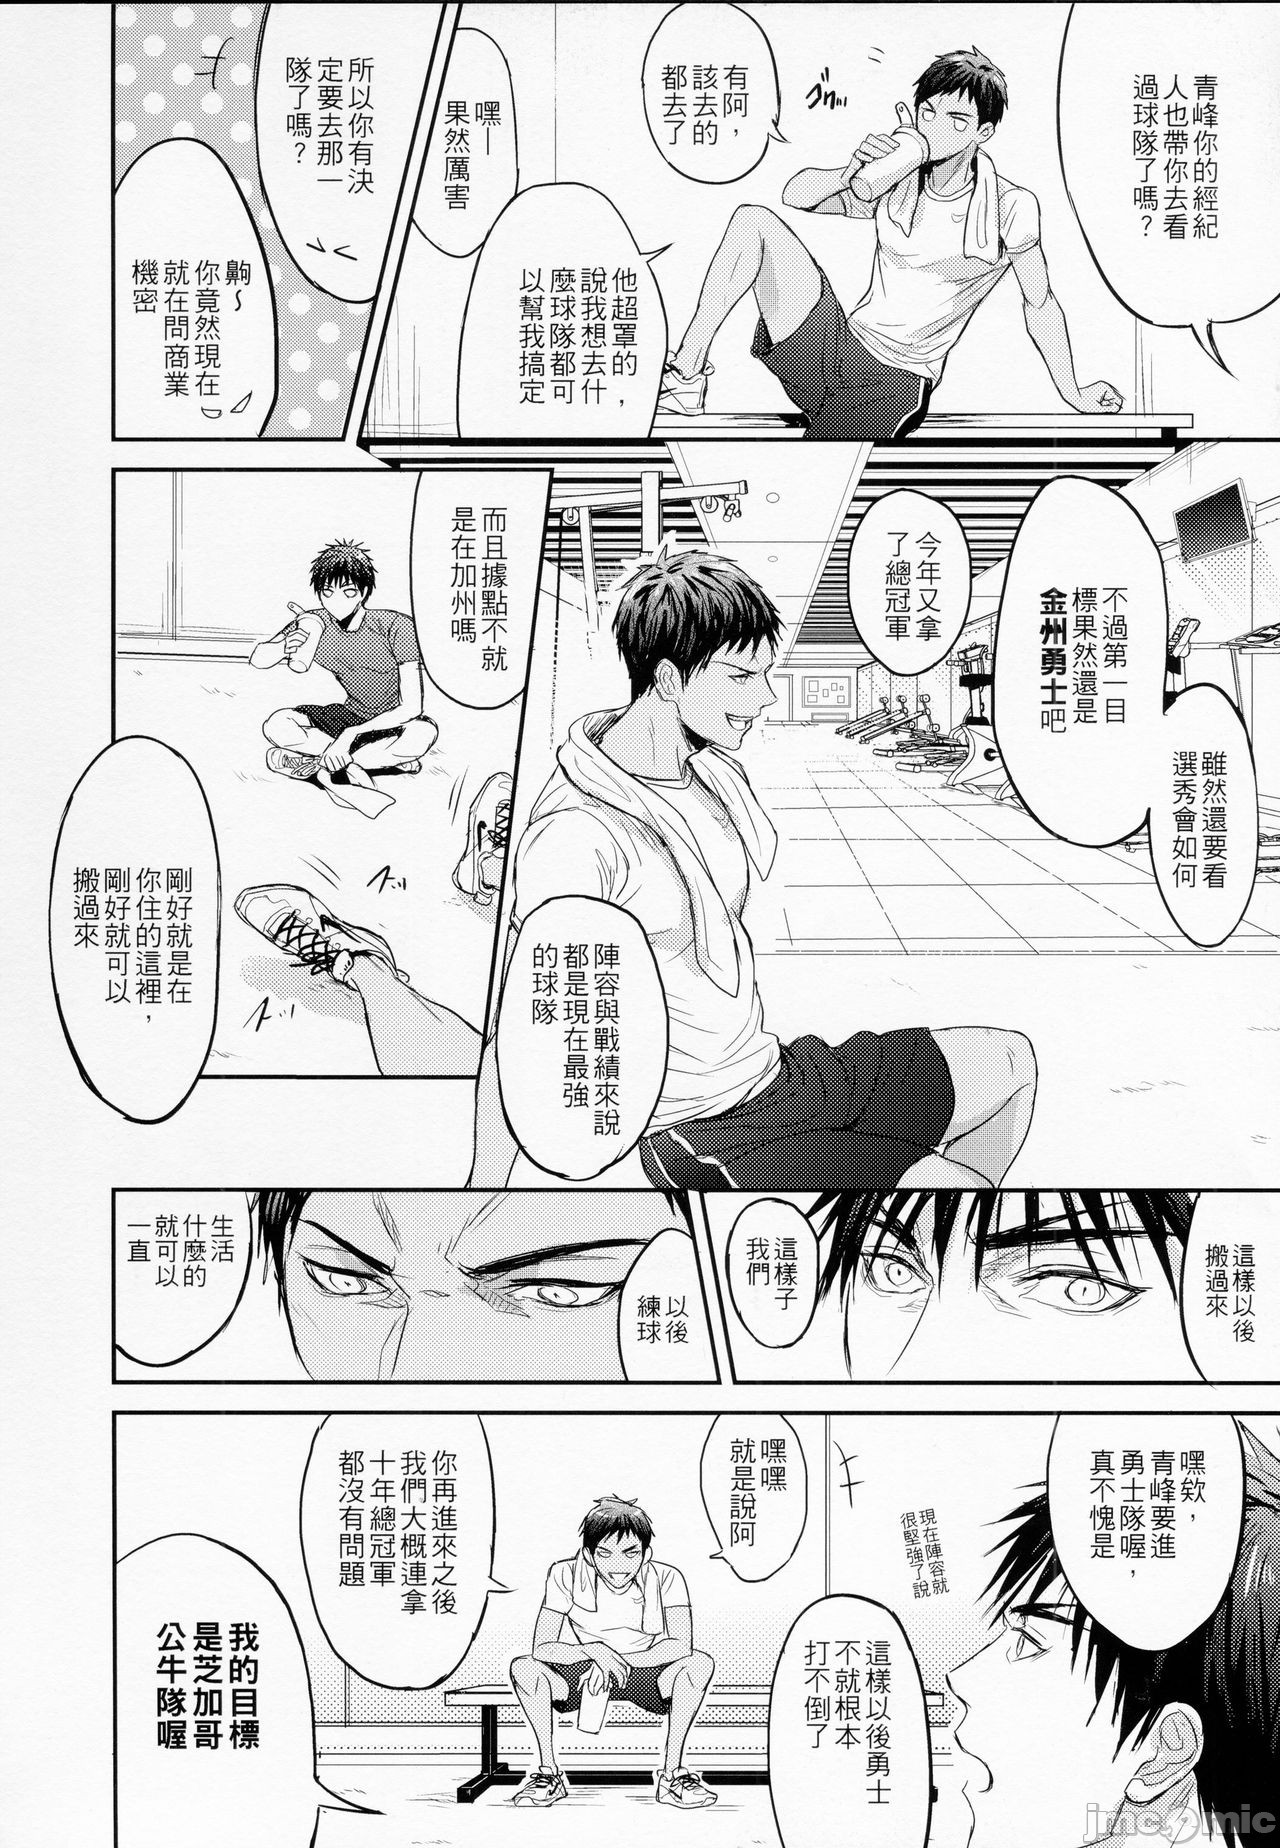 【This is how we WORK IT OUT (黒子のバスケ)[腐漫]】漫画-（第1话）章节漫画下拉式图片-7.jpg